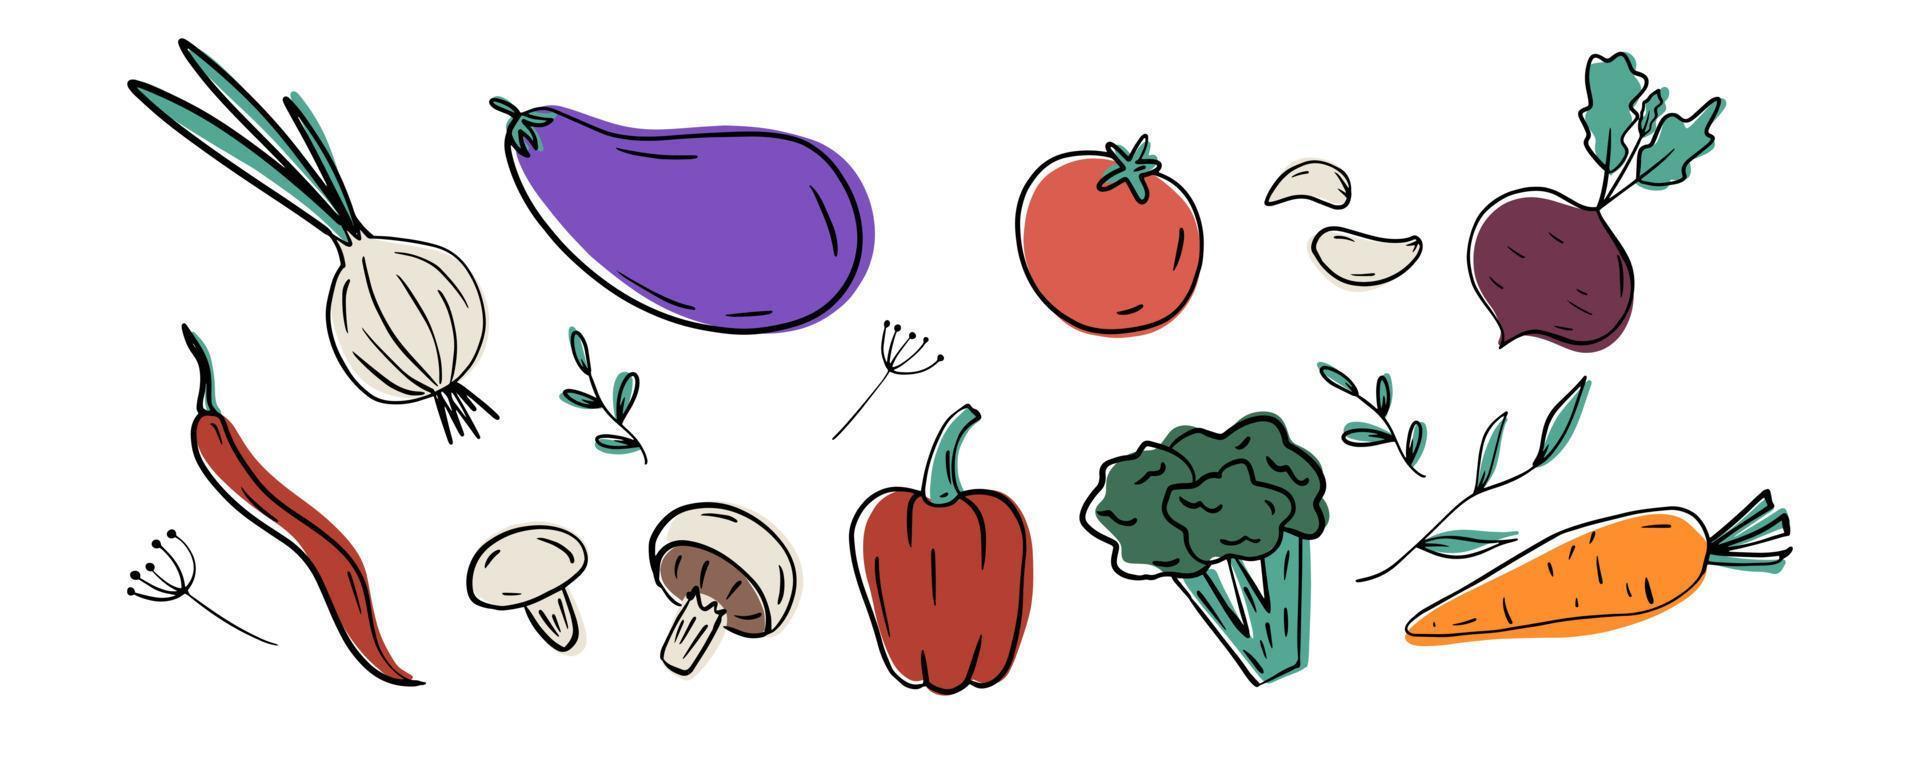 Vegetables set. Hand drawn onion, garlic, broccoli, tomato, peppers, carrots, mushrooms, beets, eggplant, hot peppers, dill. Vector illustration